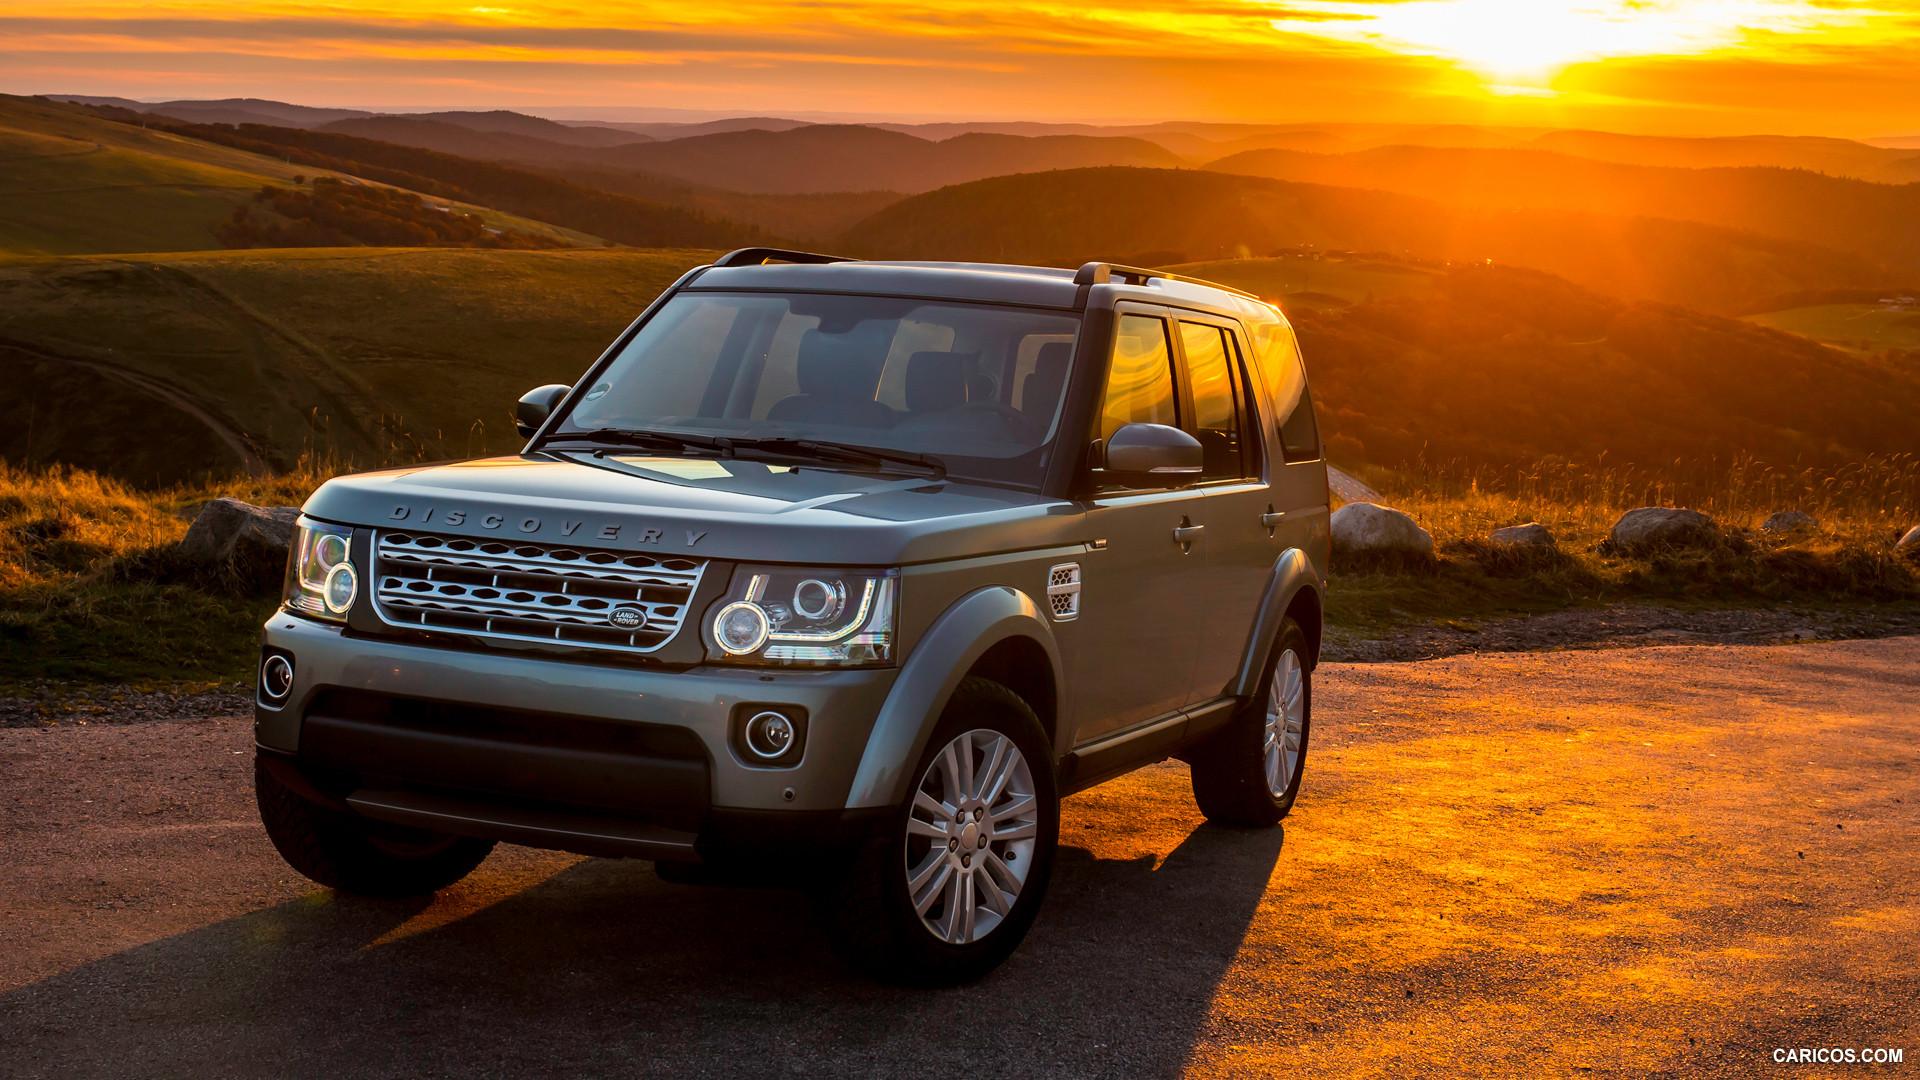 Land Rover Discovery Wallpapers - Wallpaper Cave
 2014 Land Rover Discovery Wallpaper